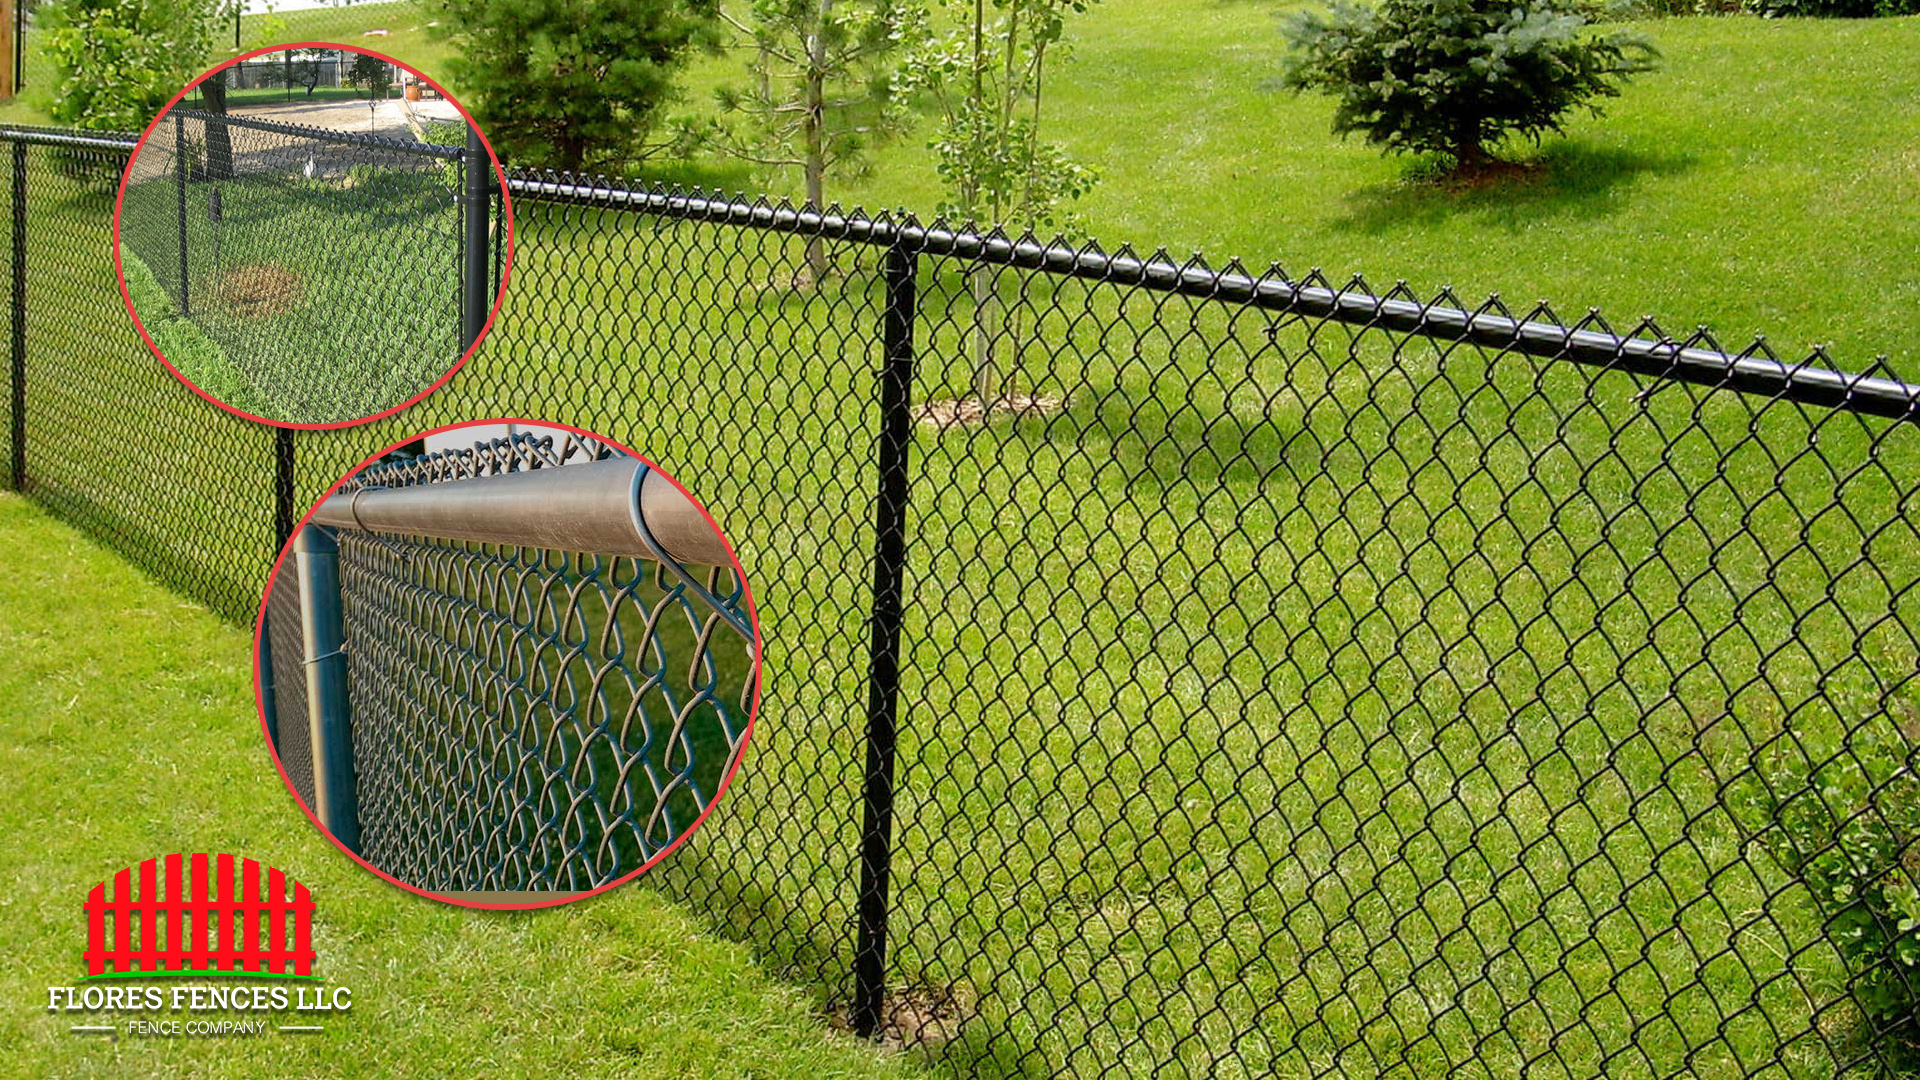 Tips for Caring for Your Chain Link Fences